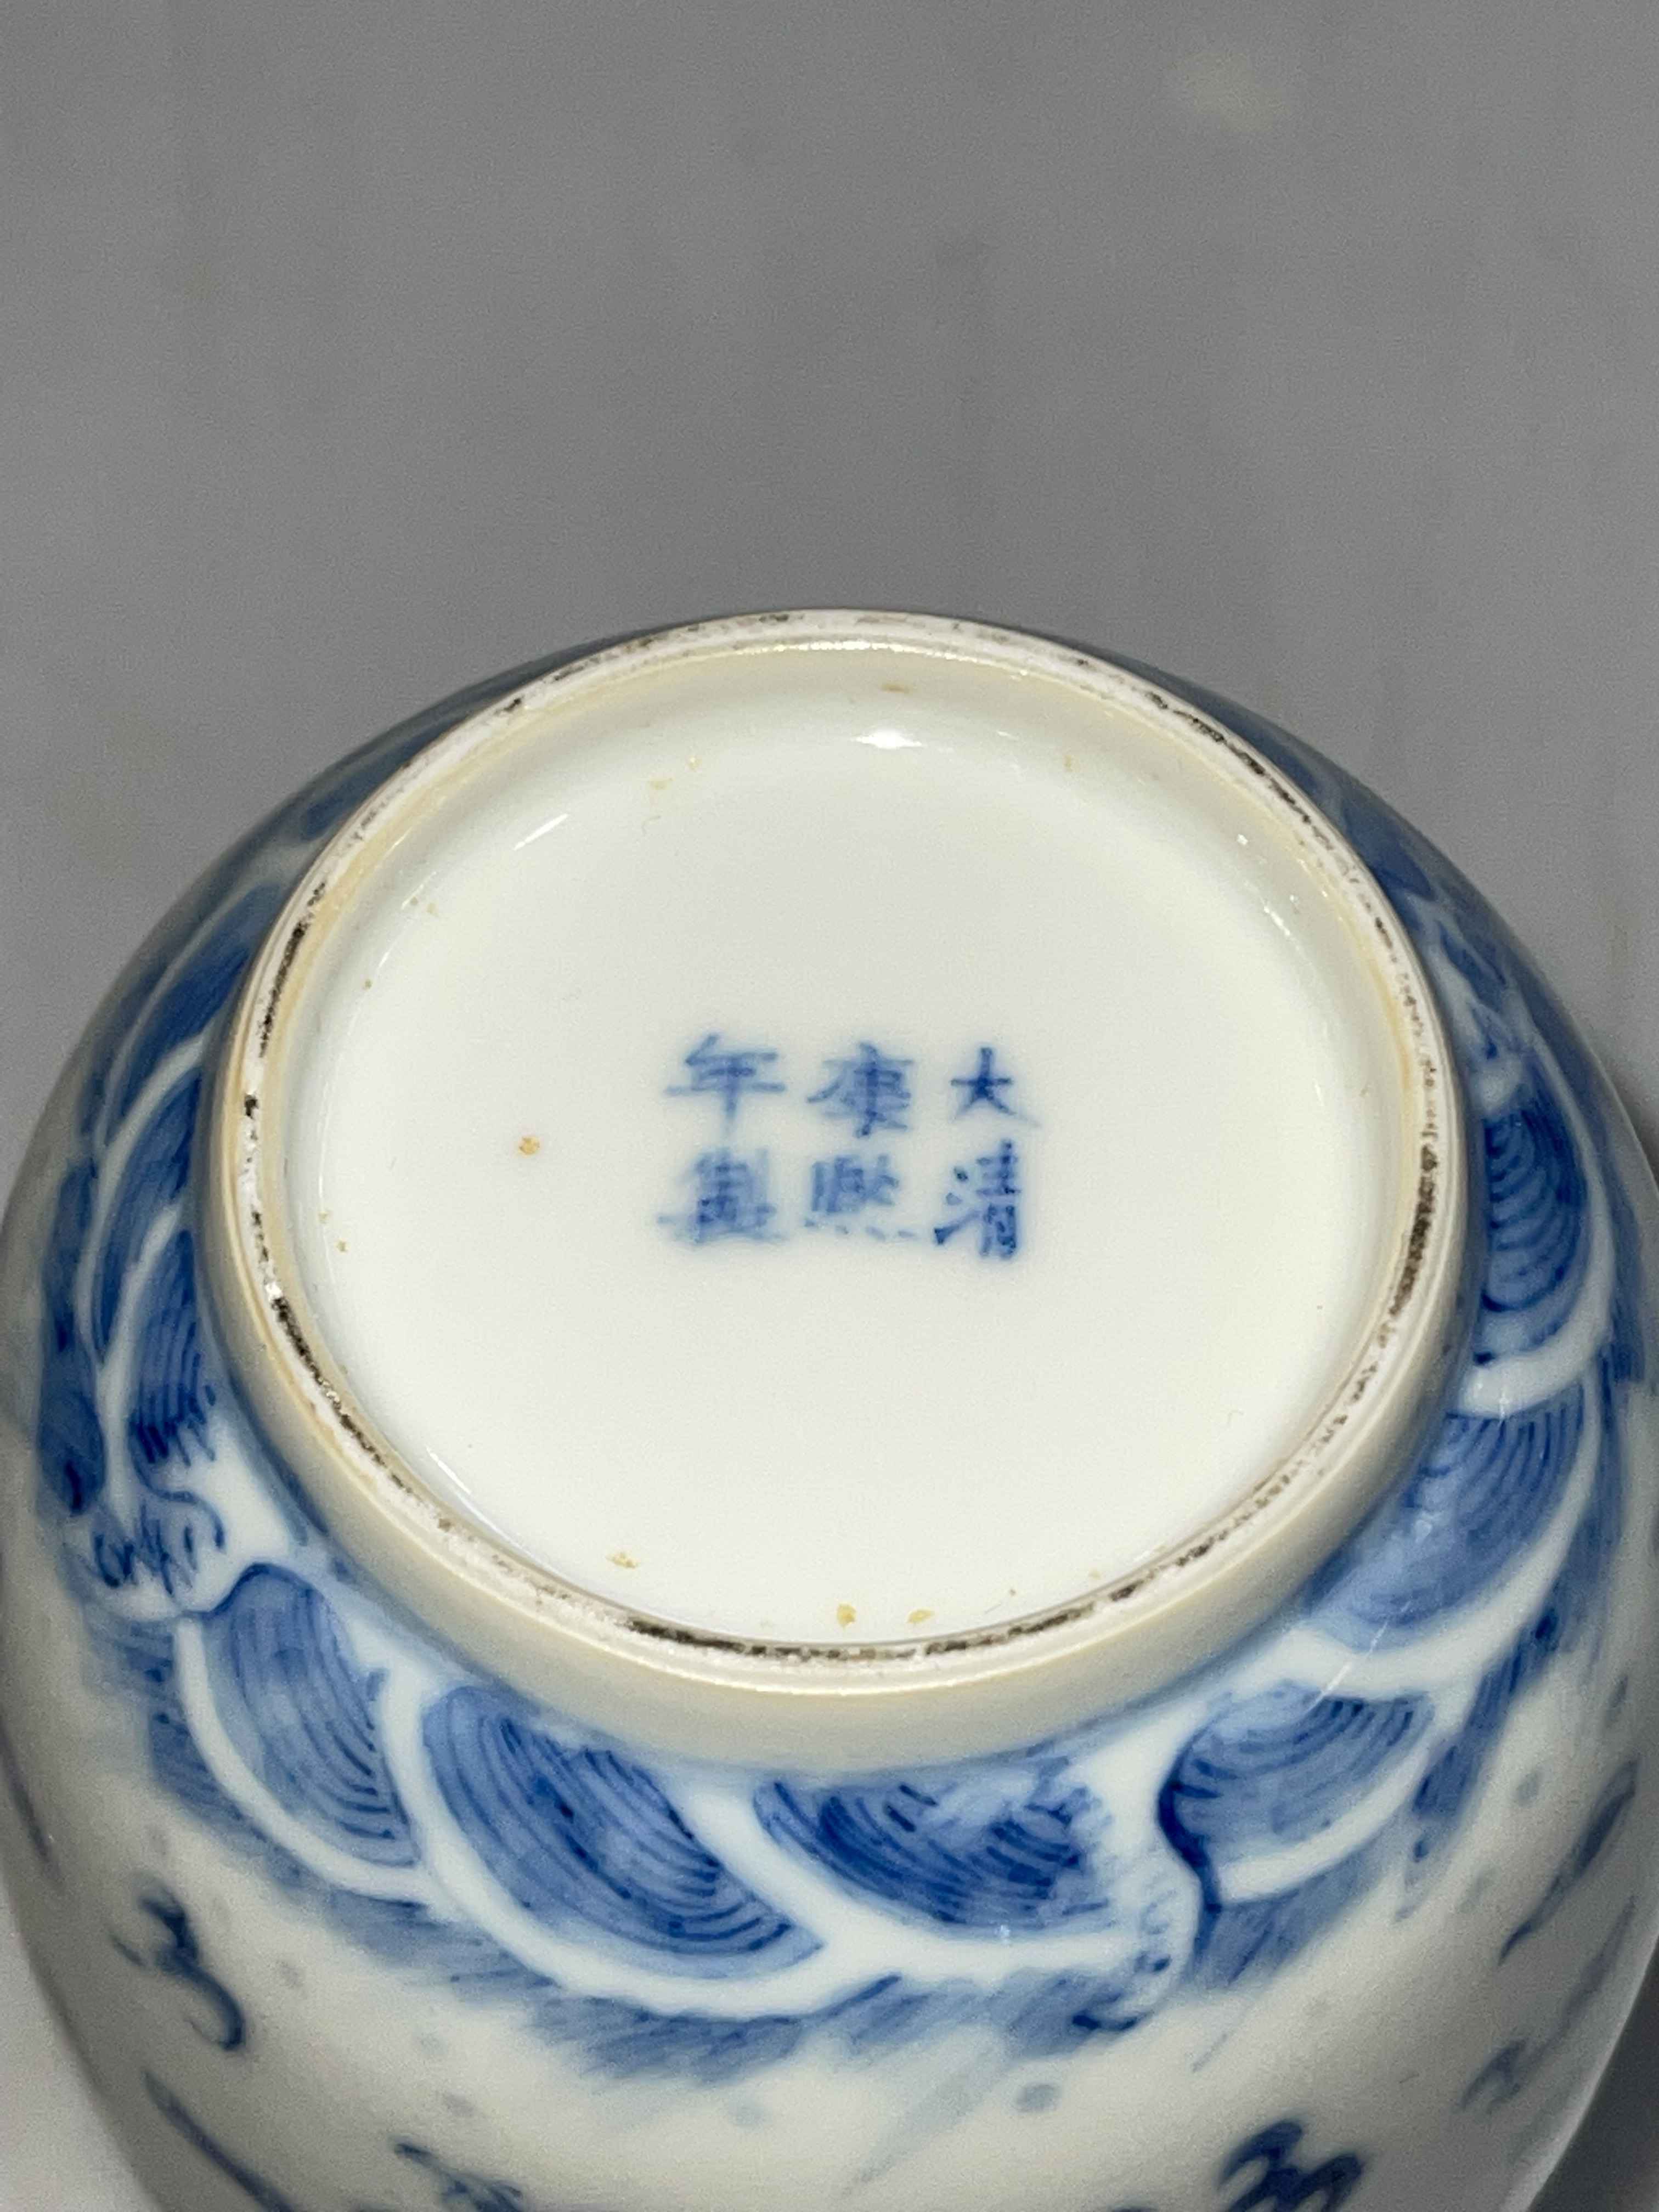 Chinese blue and white vase decorated with dragons and clouds, six character mark to base, 16cm. - Image 4 of 4